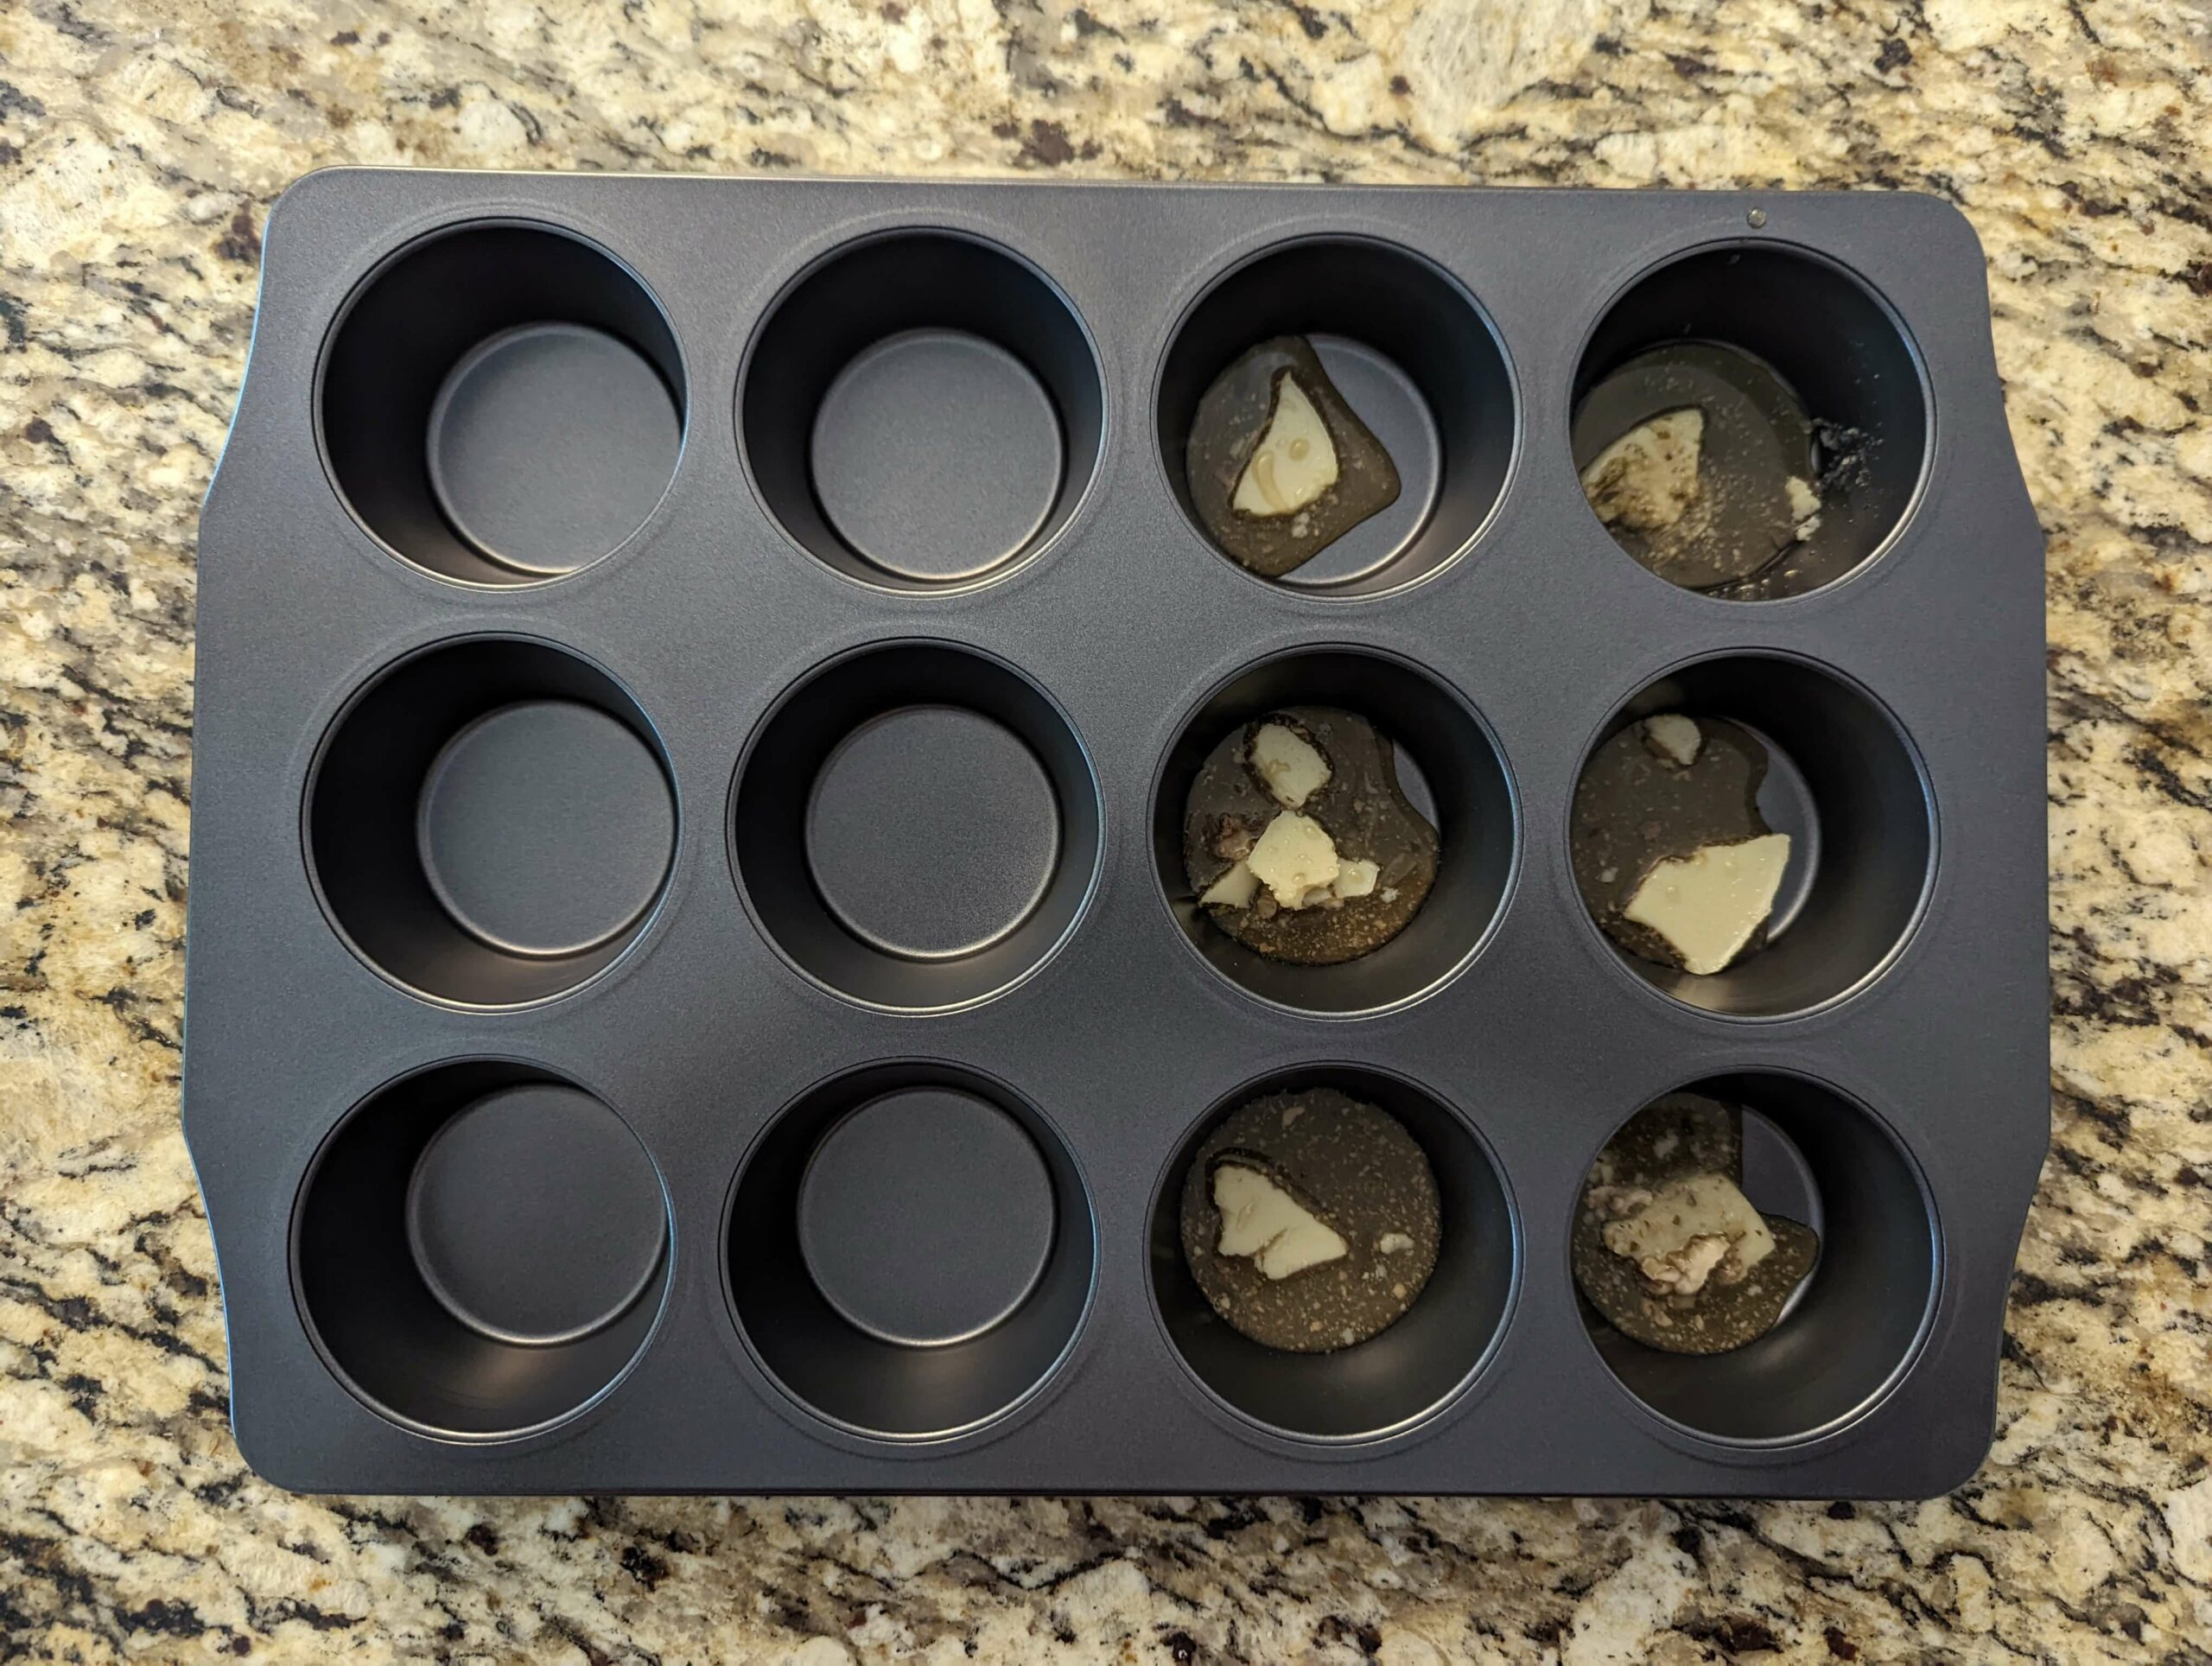 Beef drippings in a muffin tin.